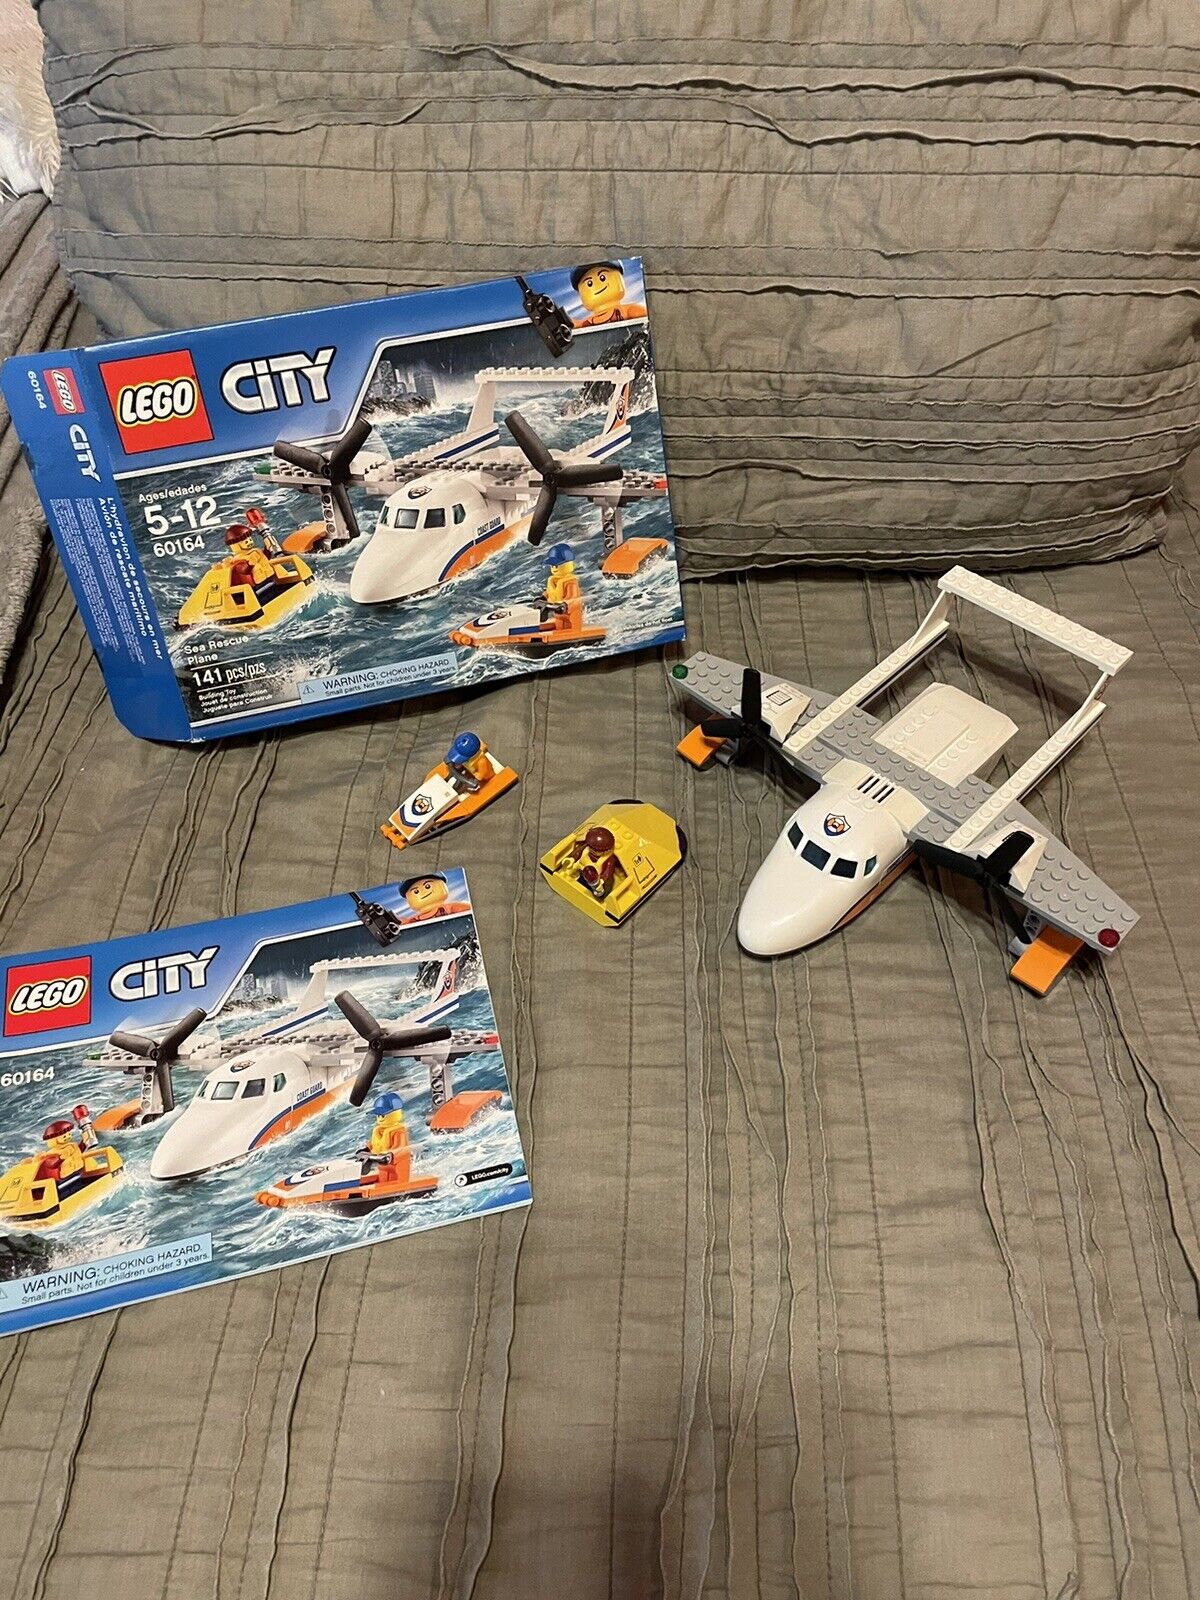 LEGO CITY: Sea Rescue Plane (60164) 100% Comes With Box And Instructions